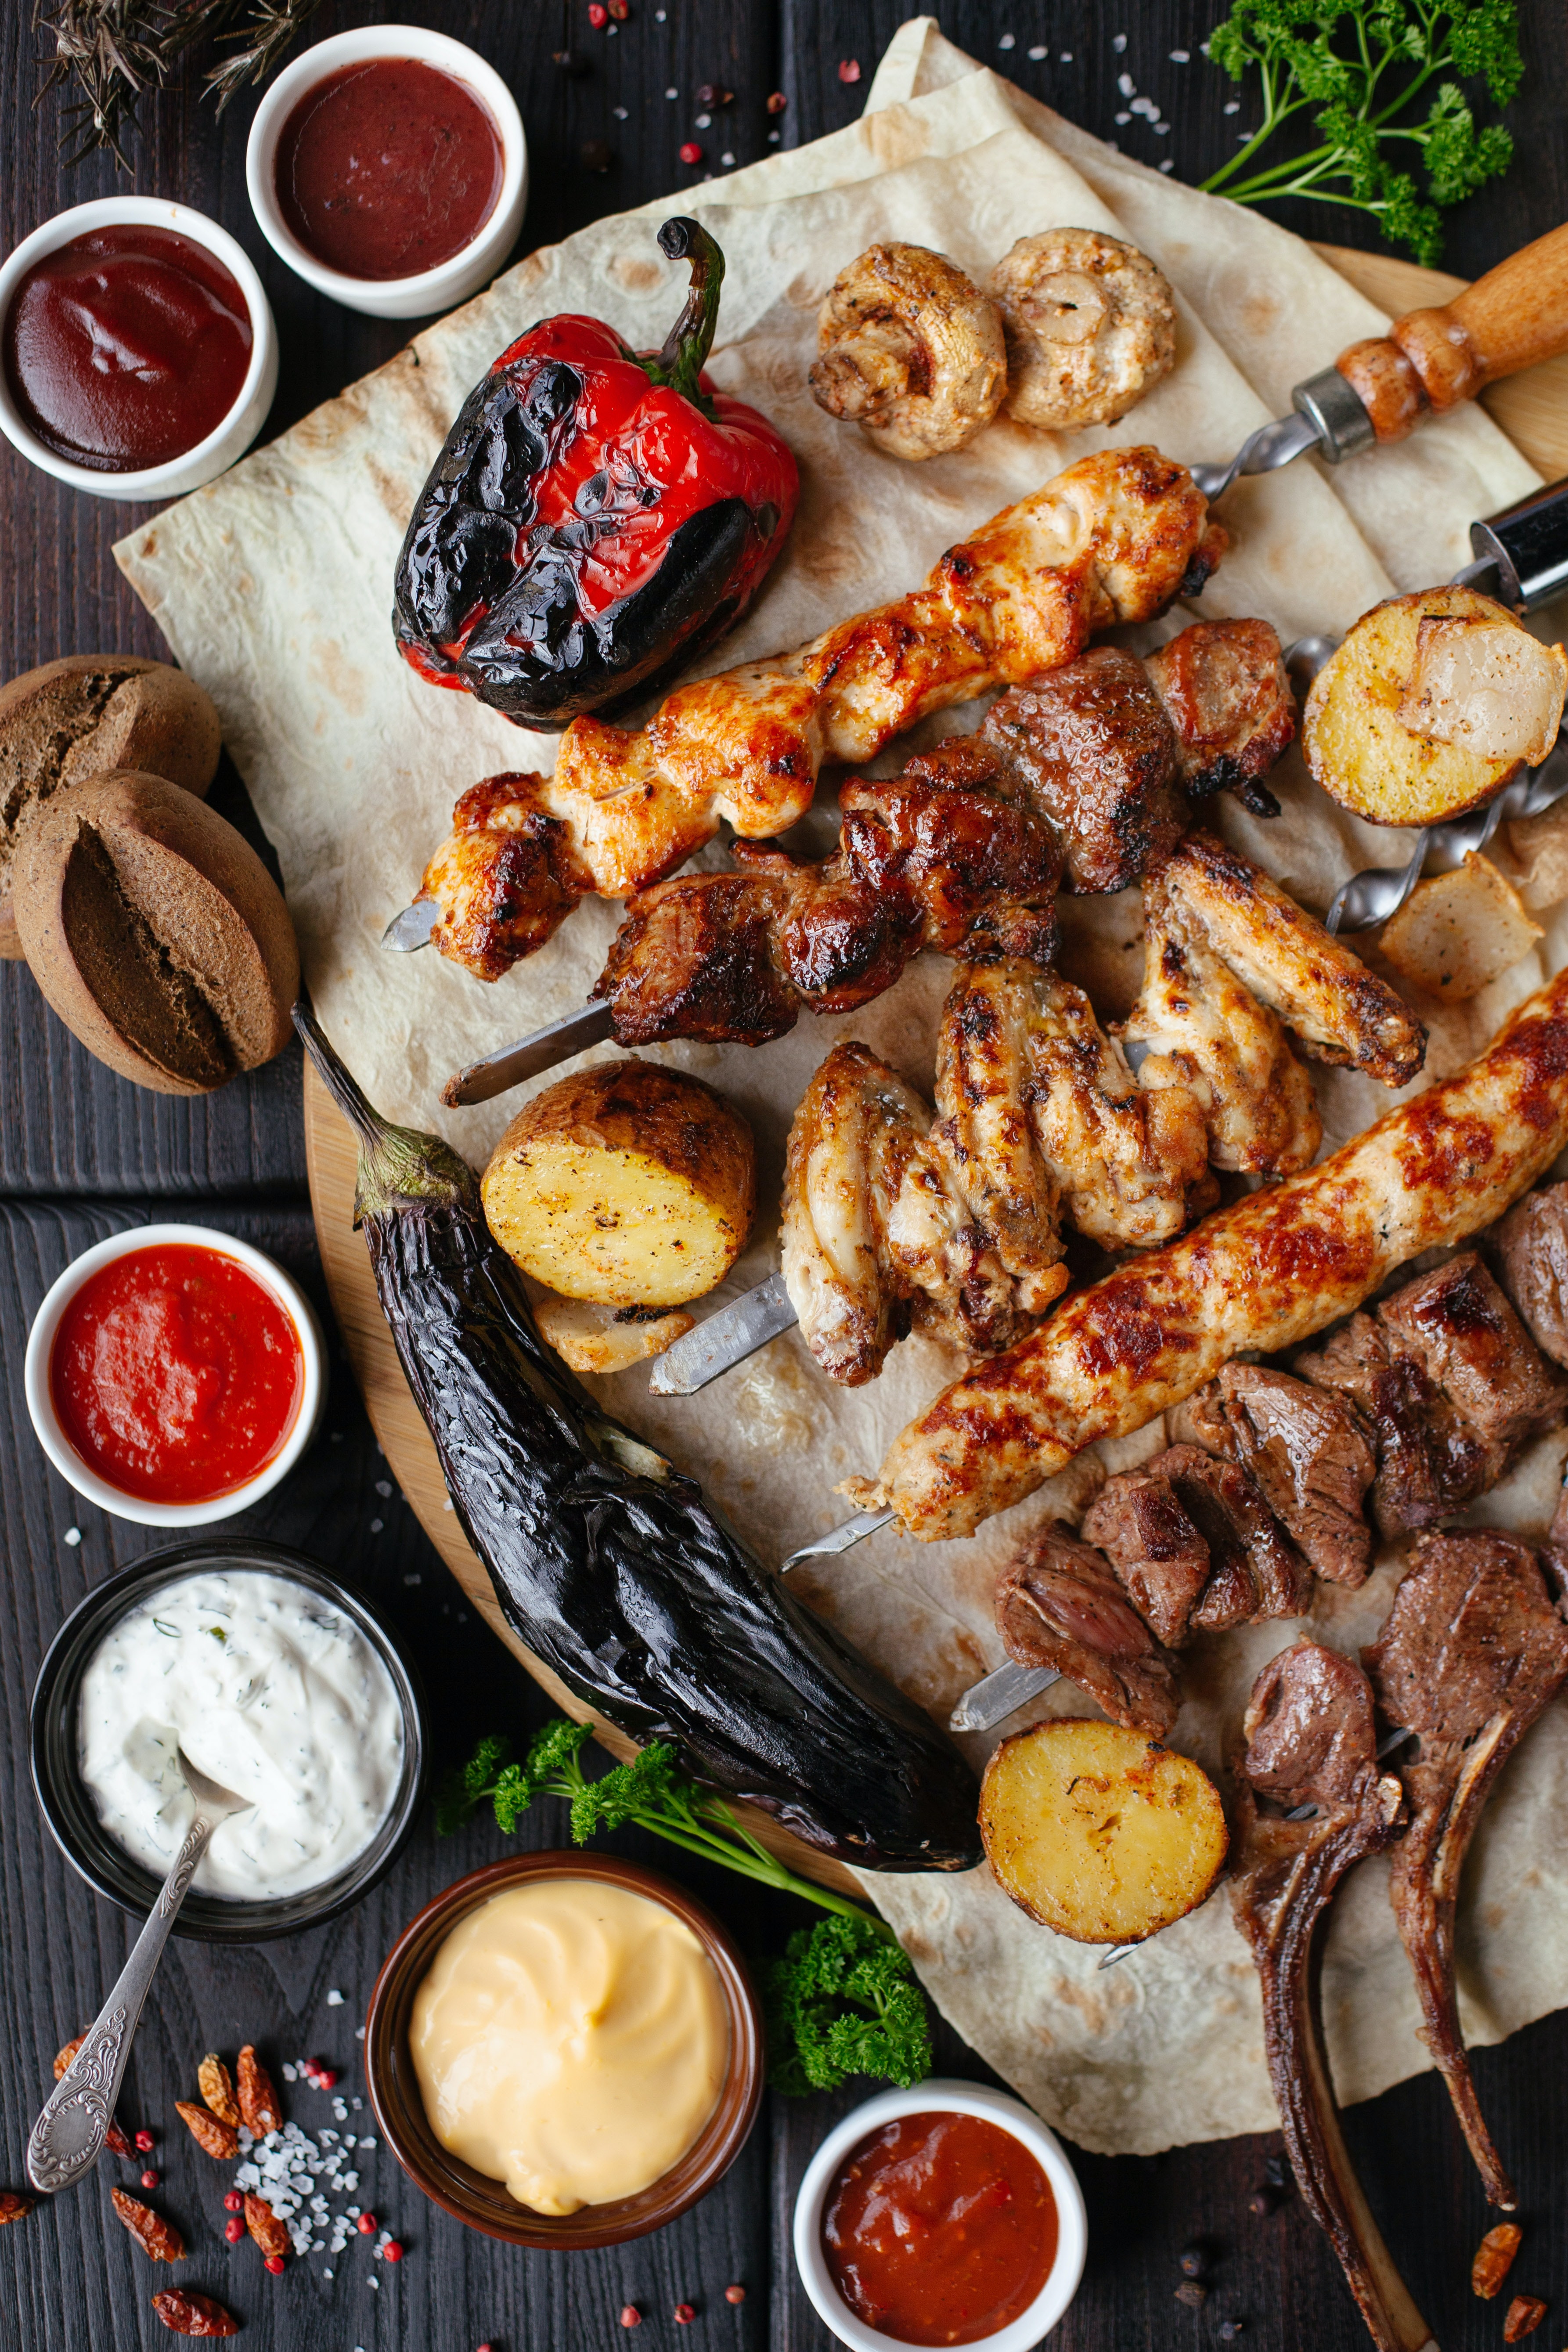 Generic image of Barbeque food